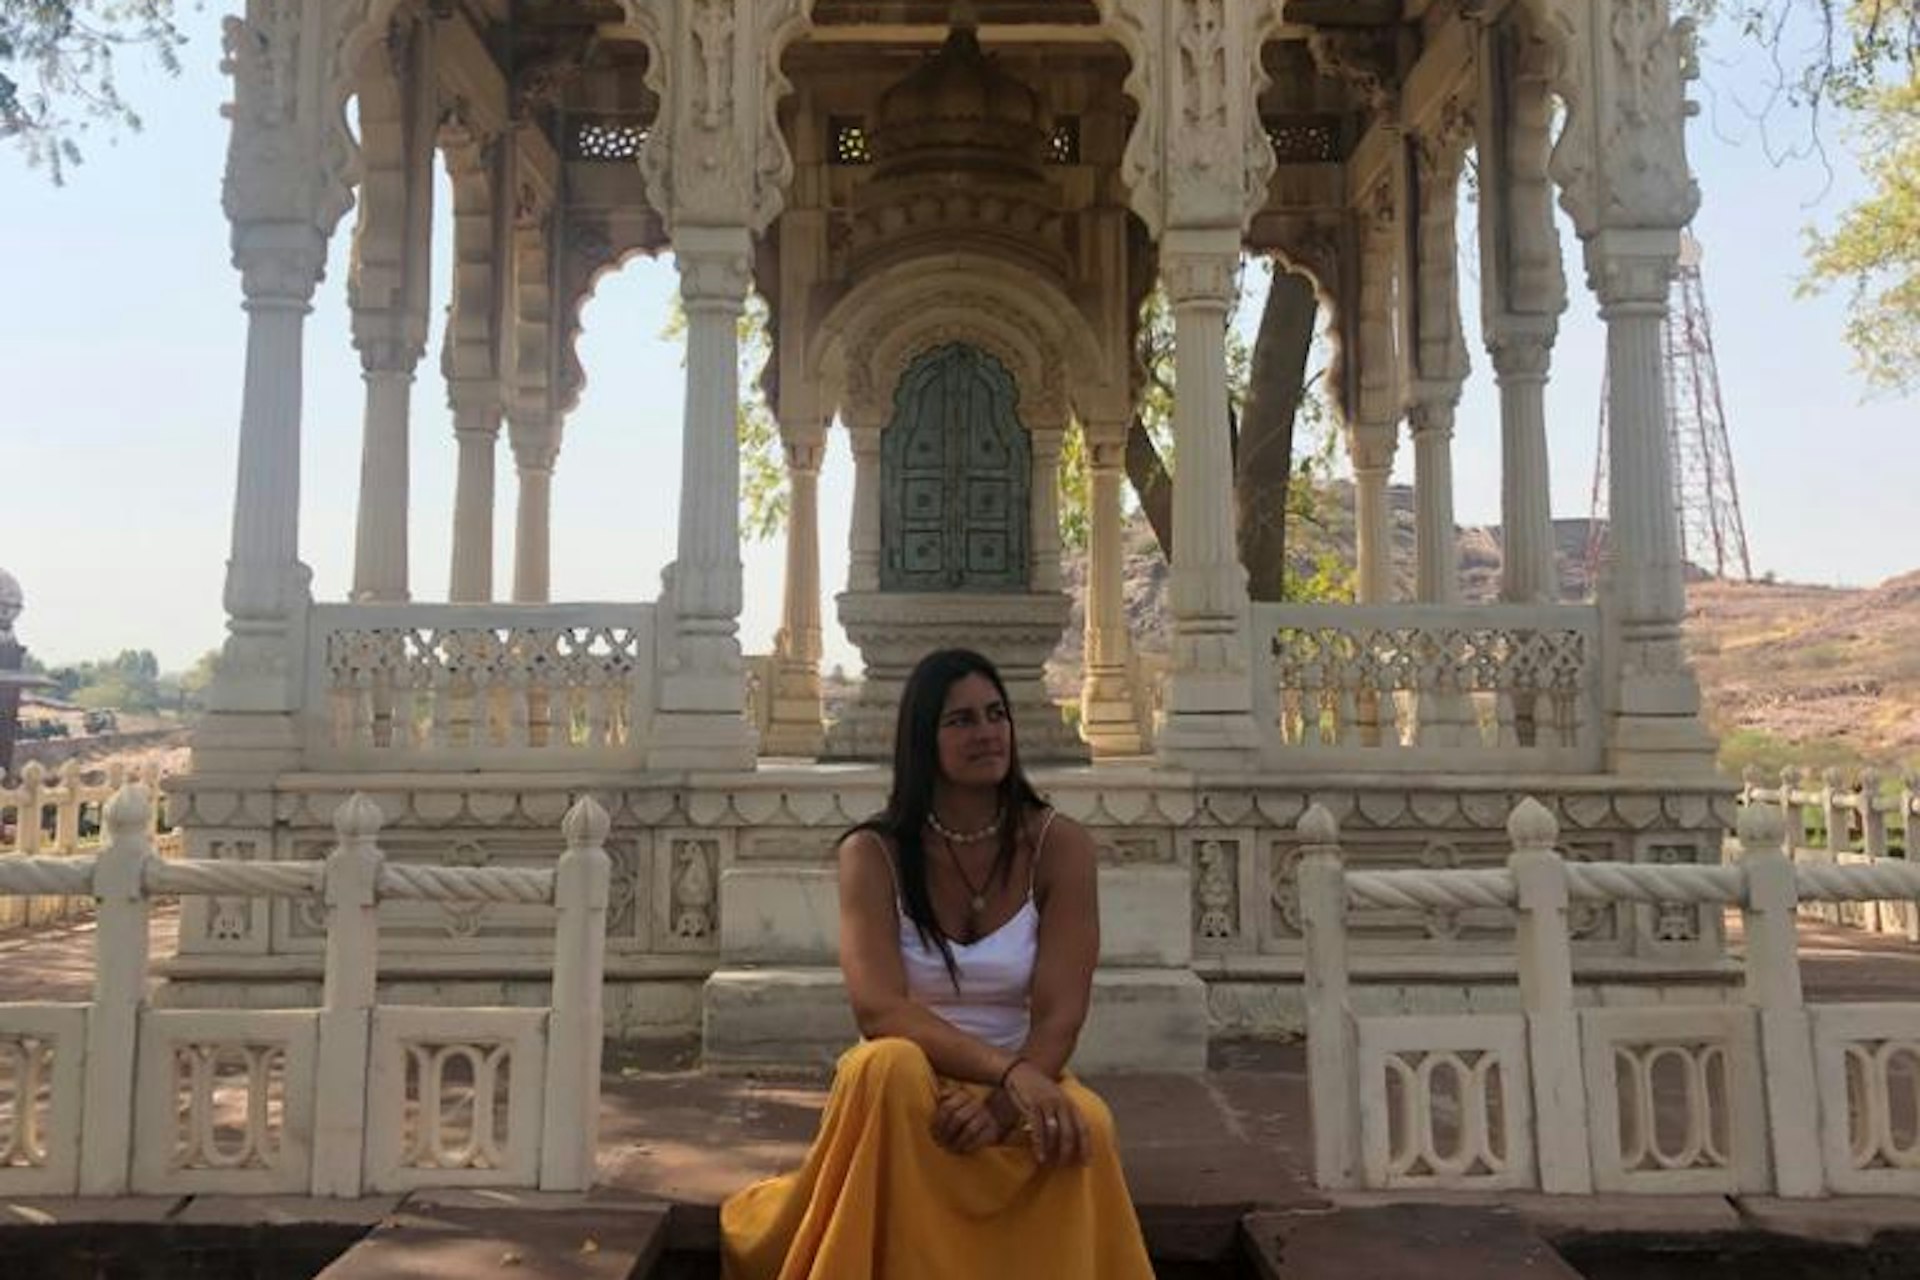 Catarina Almeida posing in front of a landmark on her travels